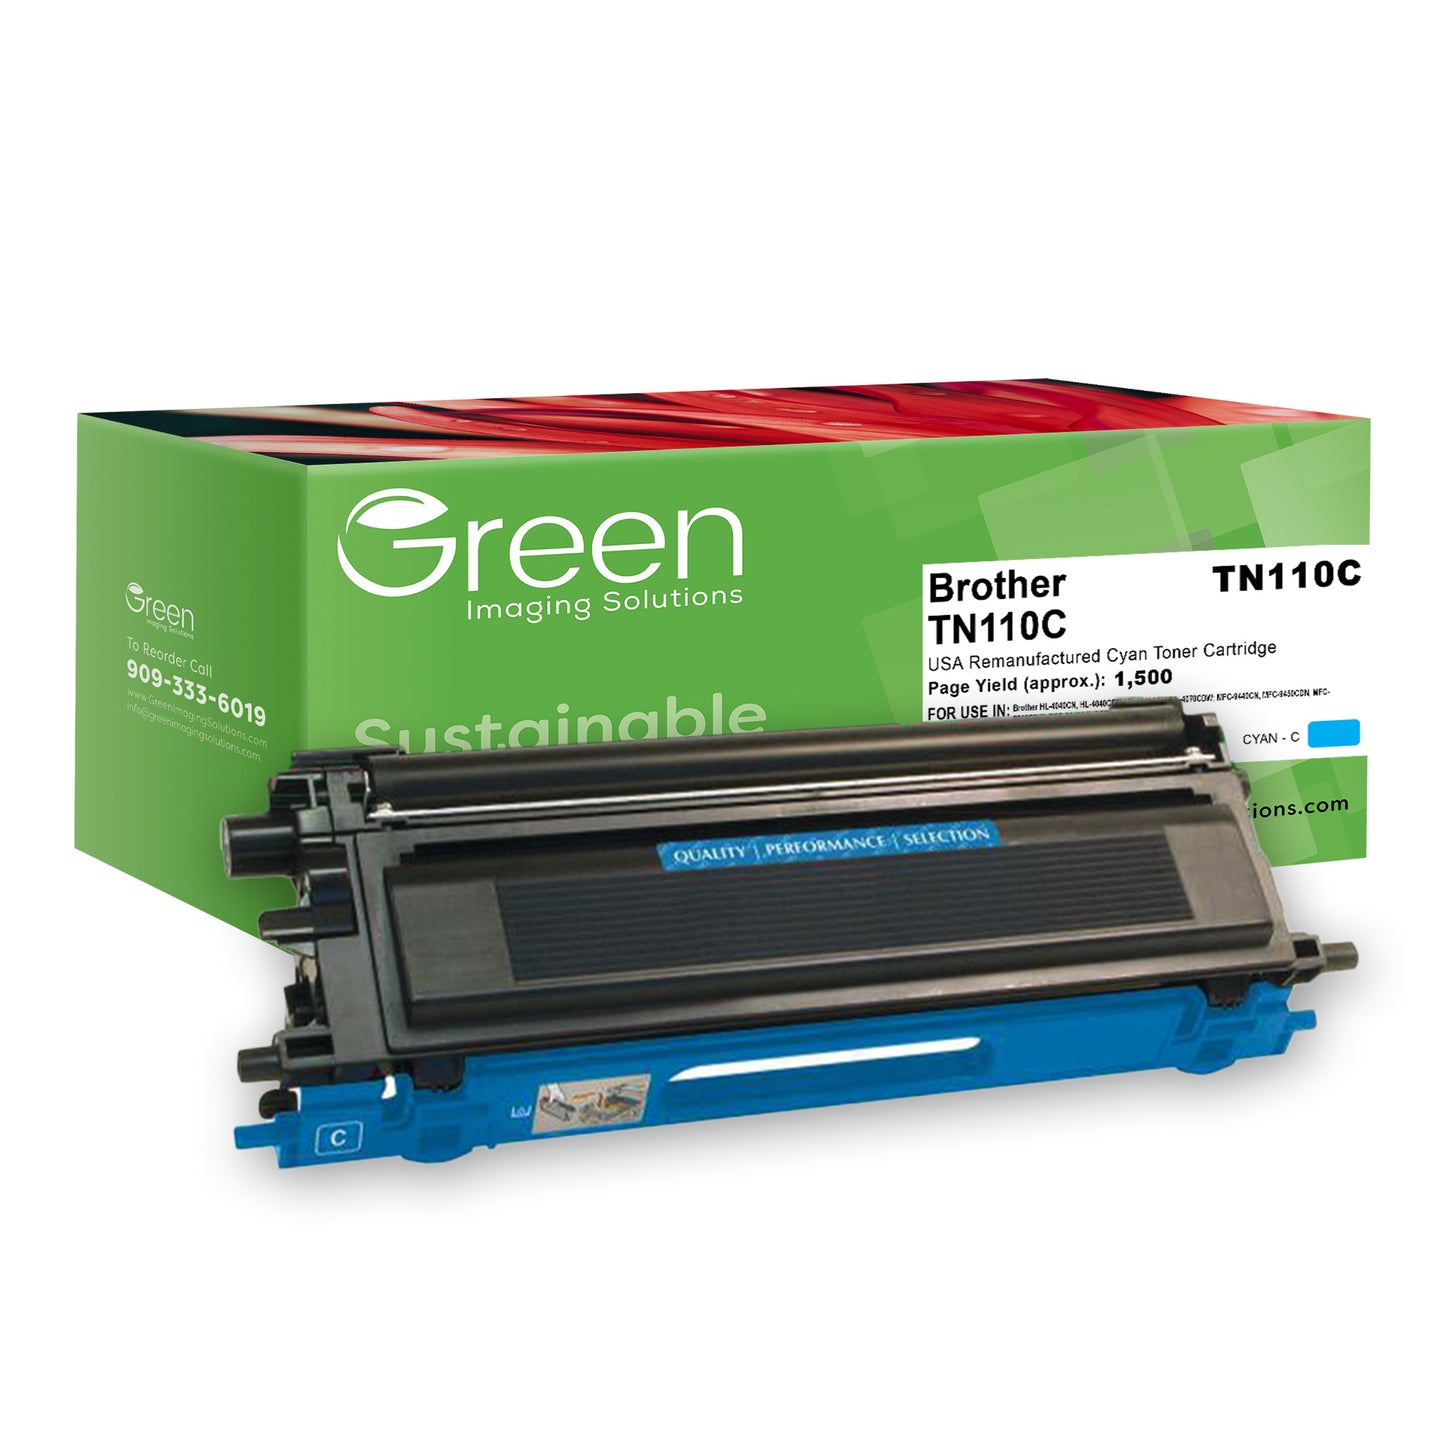 Green Imaging Solutions USA Remanufactured Cyan Toner Cartridge for Brother TN110